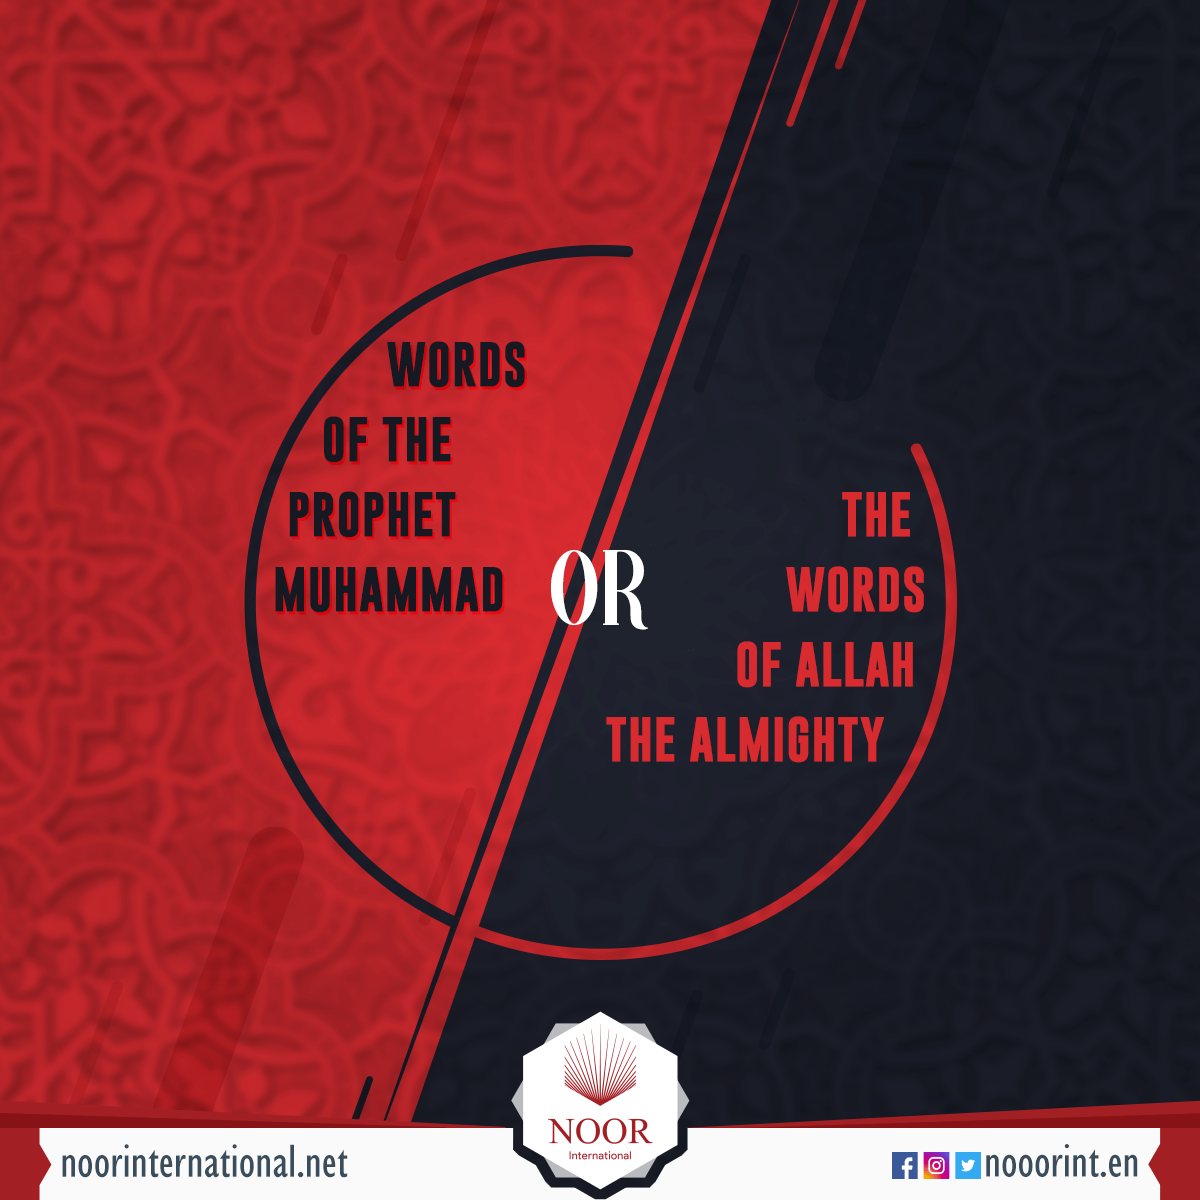 Is the Quran the words of the Prophet Muhammad or the words of Allah the almighty?